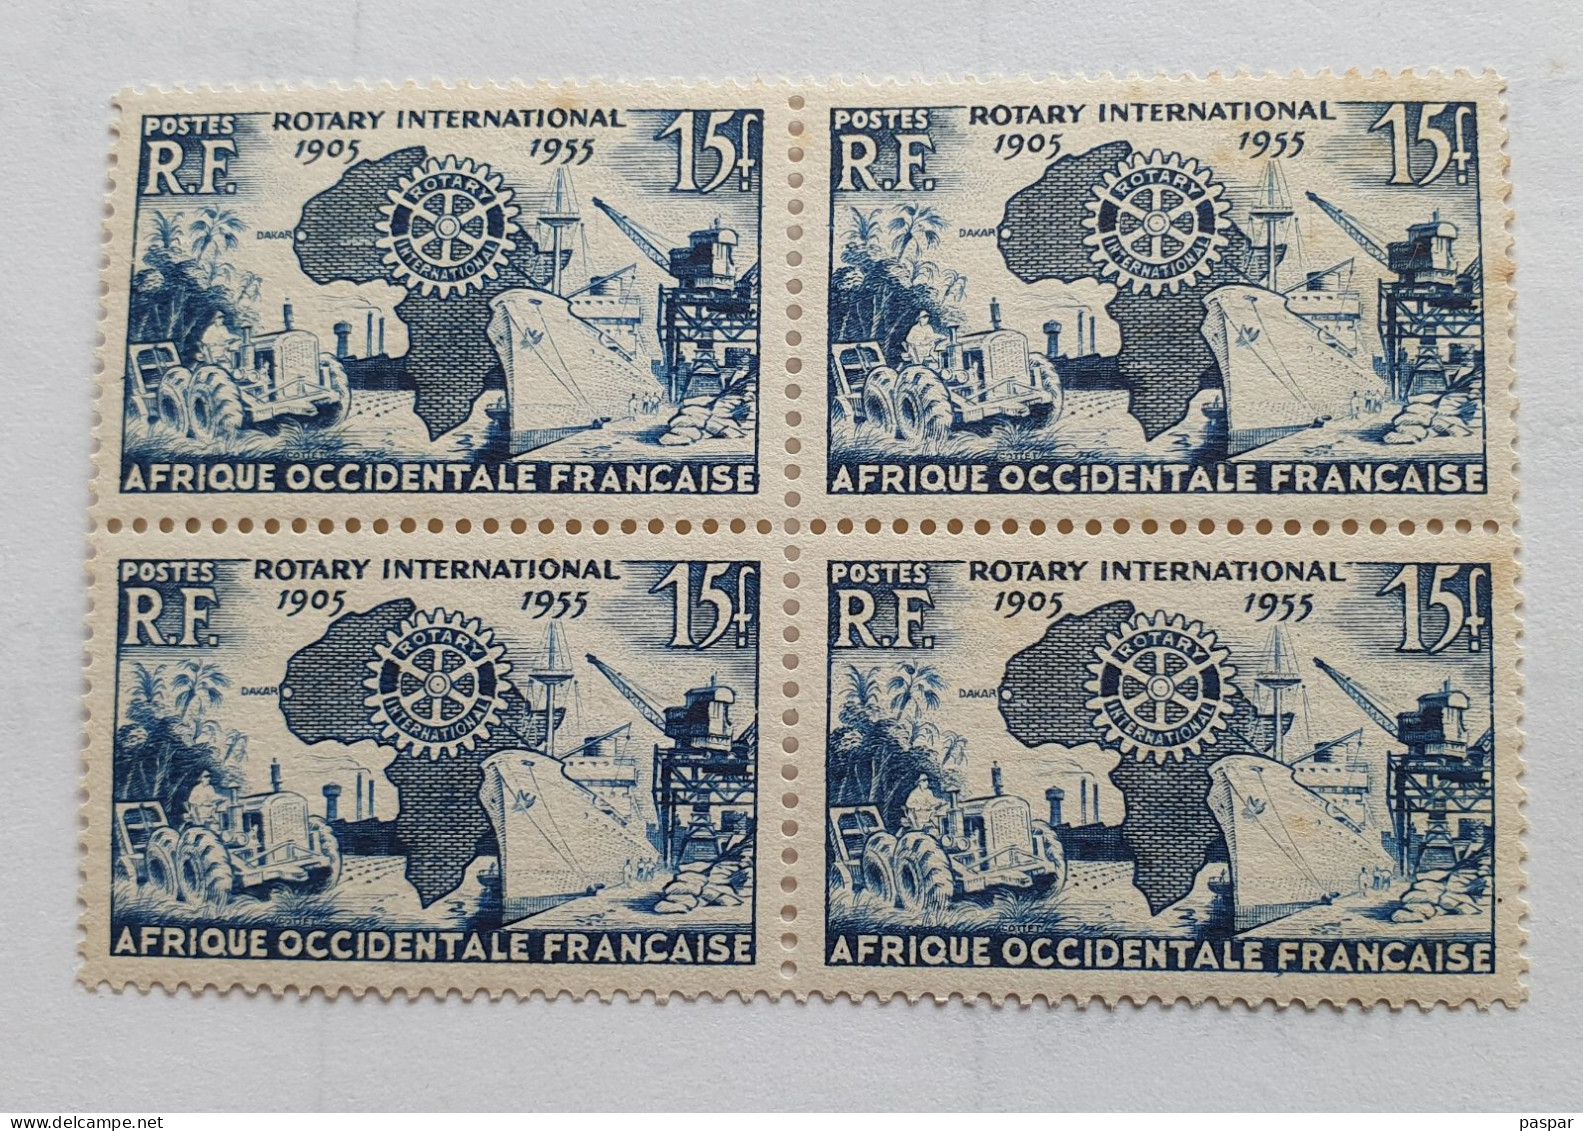 Bloc De 4 Timbres Neufs AOF 15F Afrique Occidentale Française 1955 - MNH YT 53 - Rorary International - Unused Stamps